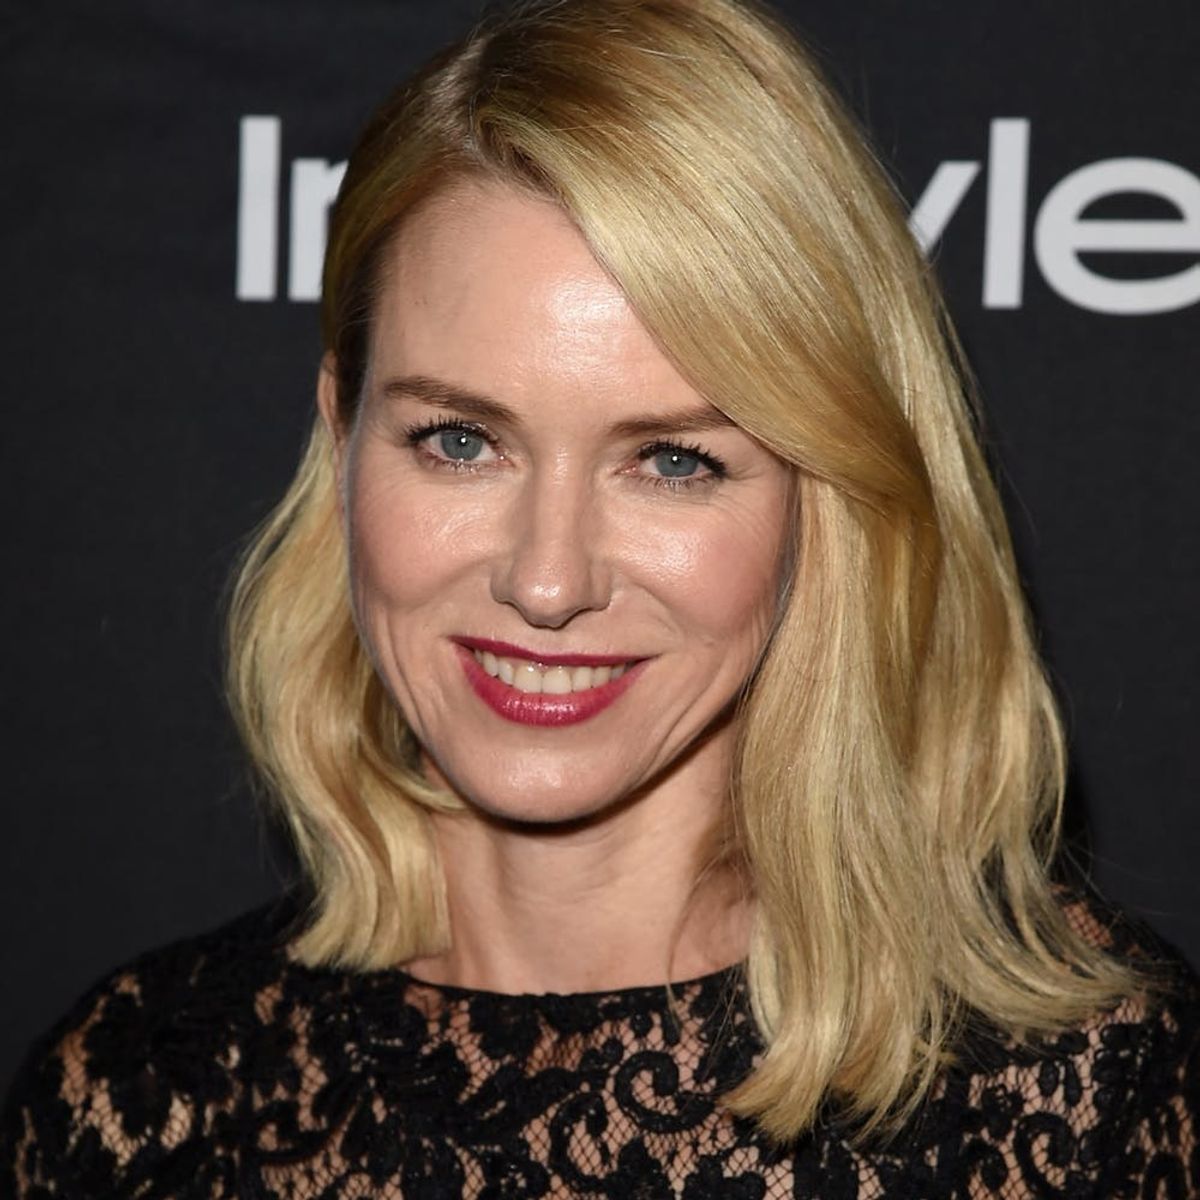 Naomi Watts’ New Haircut Is the Perfect Way to Update Your Lob